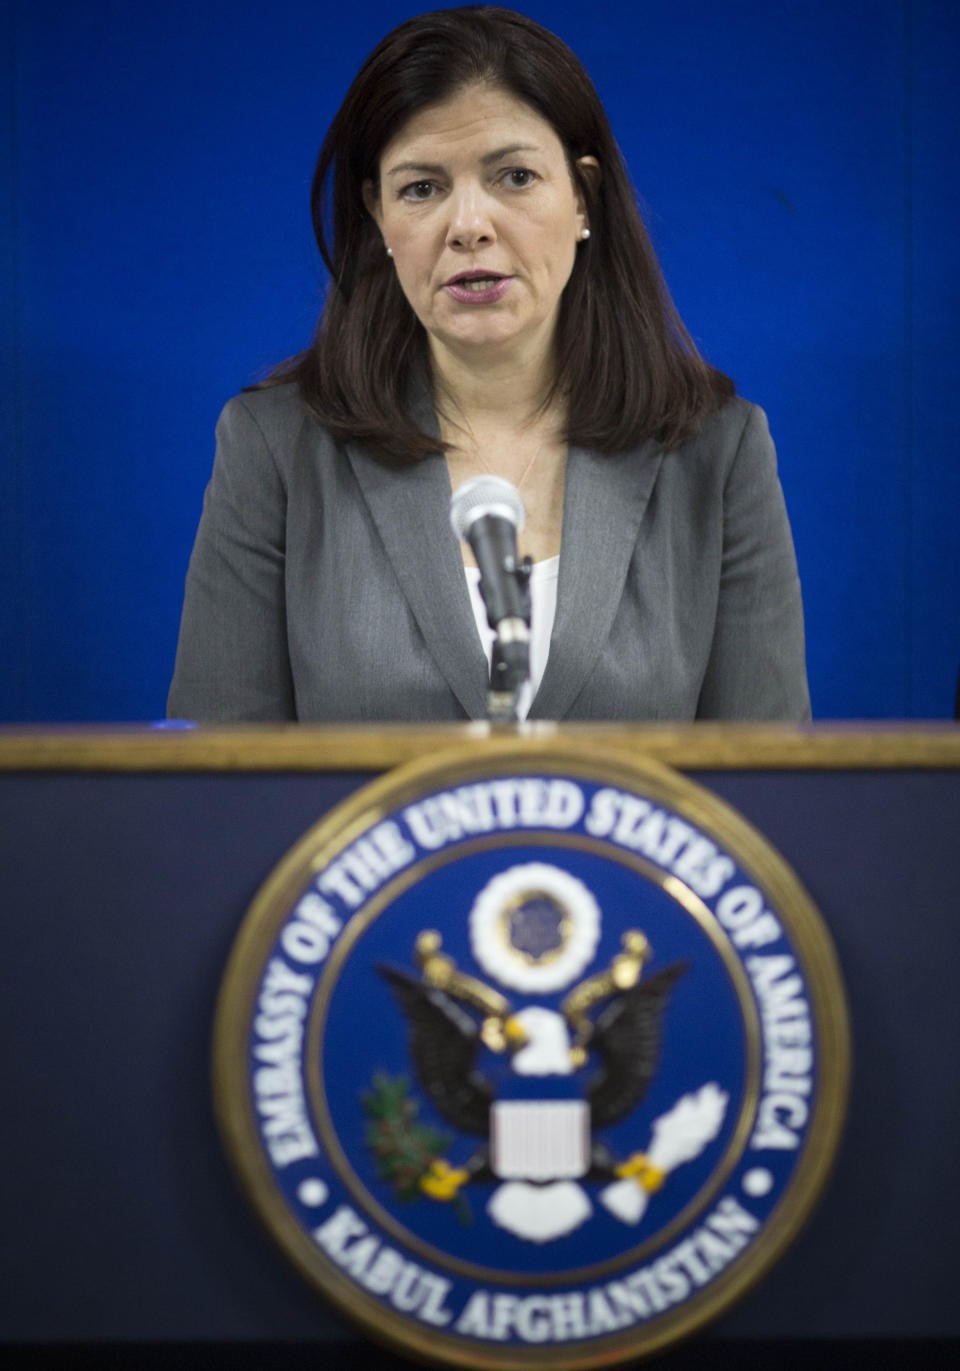 U.S. Sen. Kelly Ayotte speaks during a press conference at the American Embassy in Kabul, Afghanistan, Saturday, March 22, 2014. Ayotte stressed out during her brief visit to Afghanistan that no American forces would remain in Afghanistan without a bilateral security agreement, but she also said Obama shouldn’t wait for that to give an idea of what the U.S. presence would look like after the NATO-led combat mission ends at the end of this year. (AP Photo/Anja Niedringhaus)